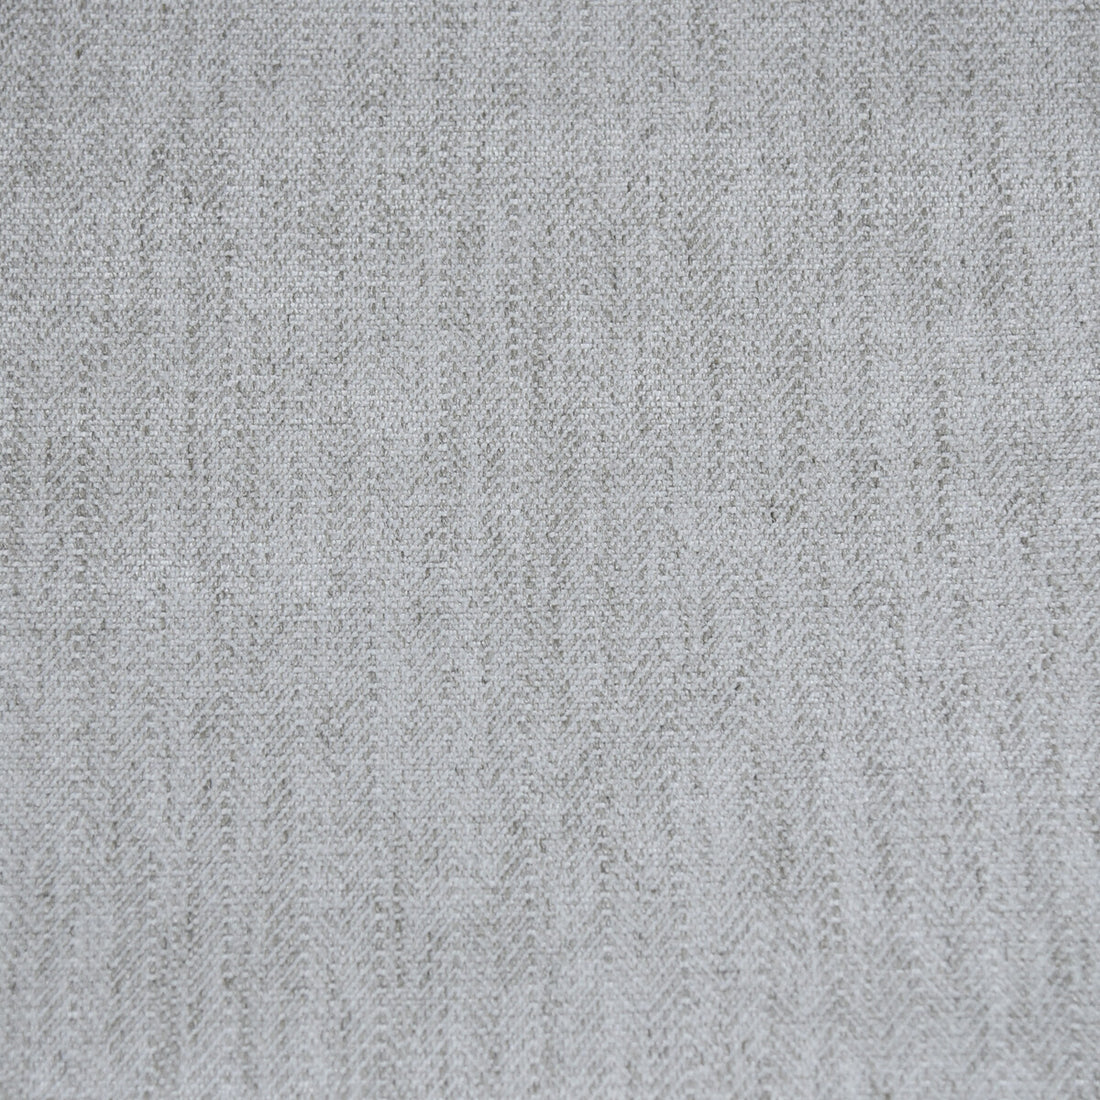 Taste Maker fabric in grey color - pattern 34459.11.0 - by Kravet Couture in the Modern Colors-Sojourn Collection collection